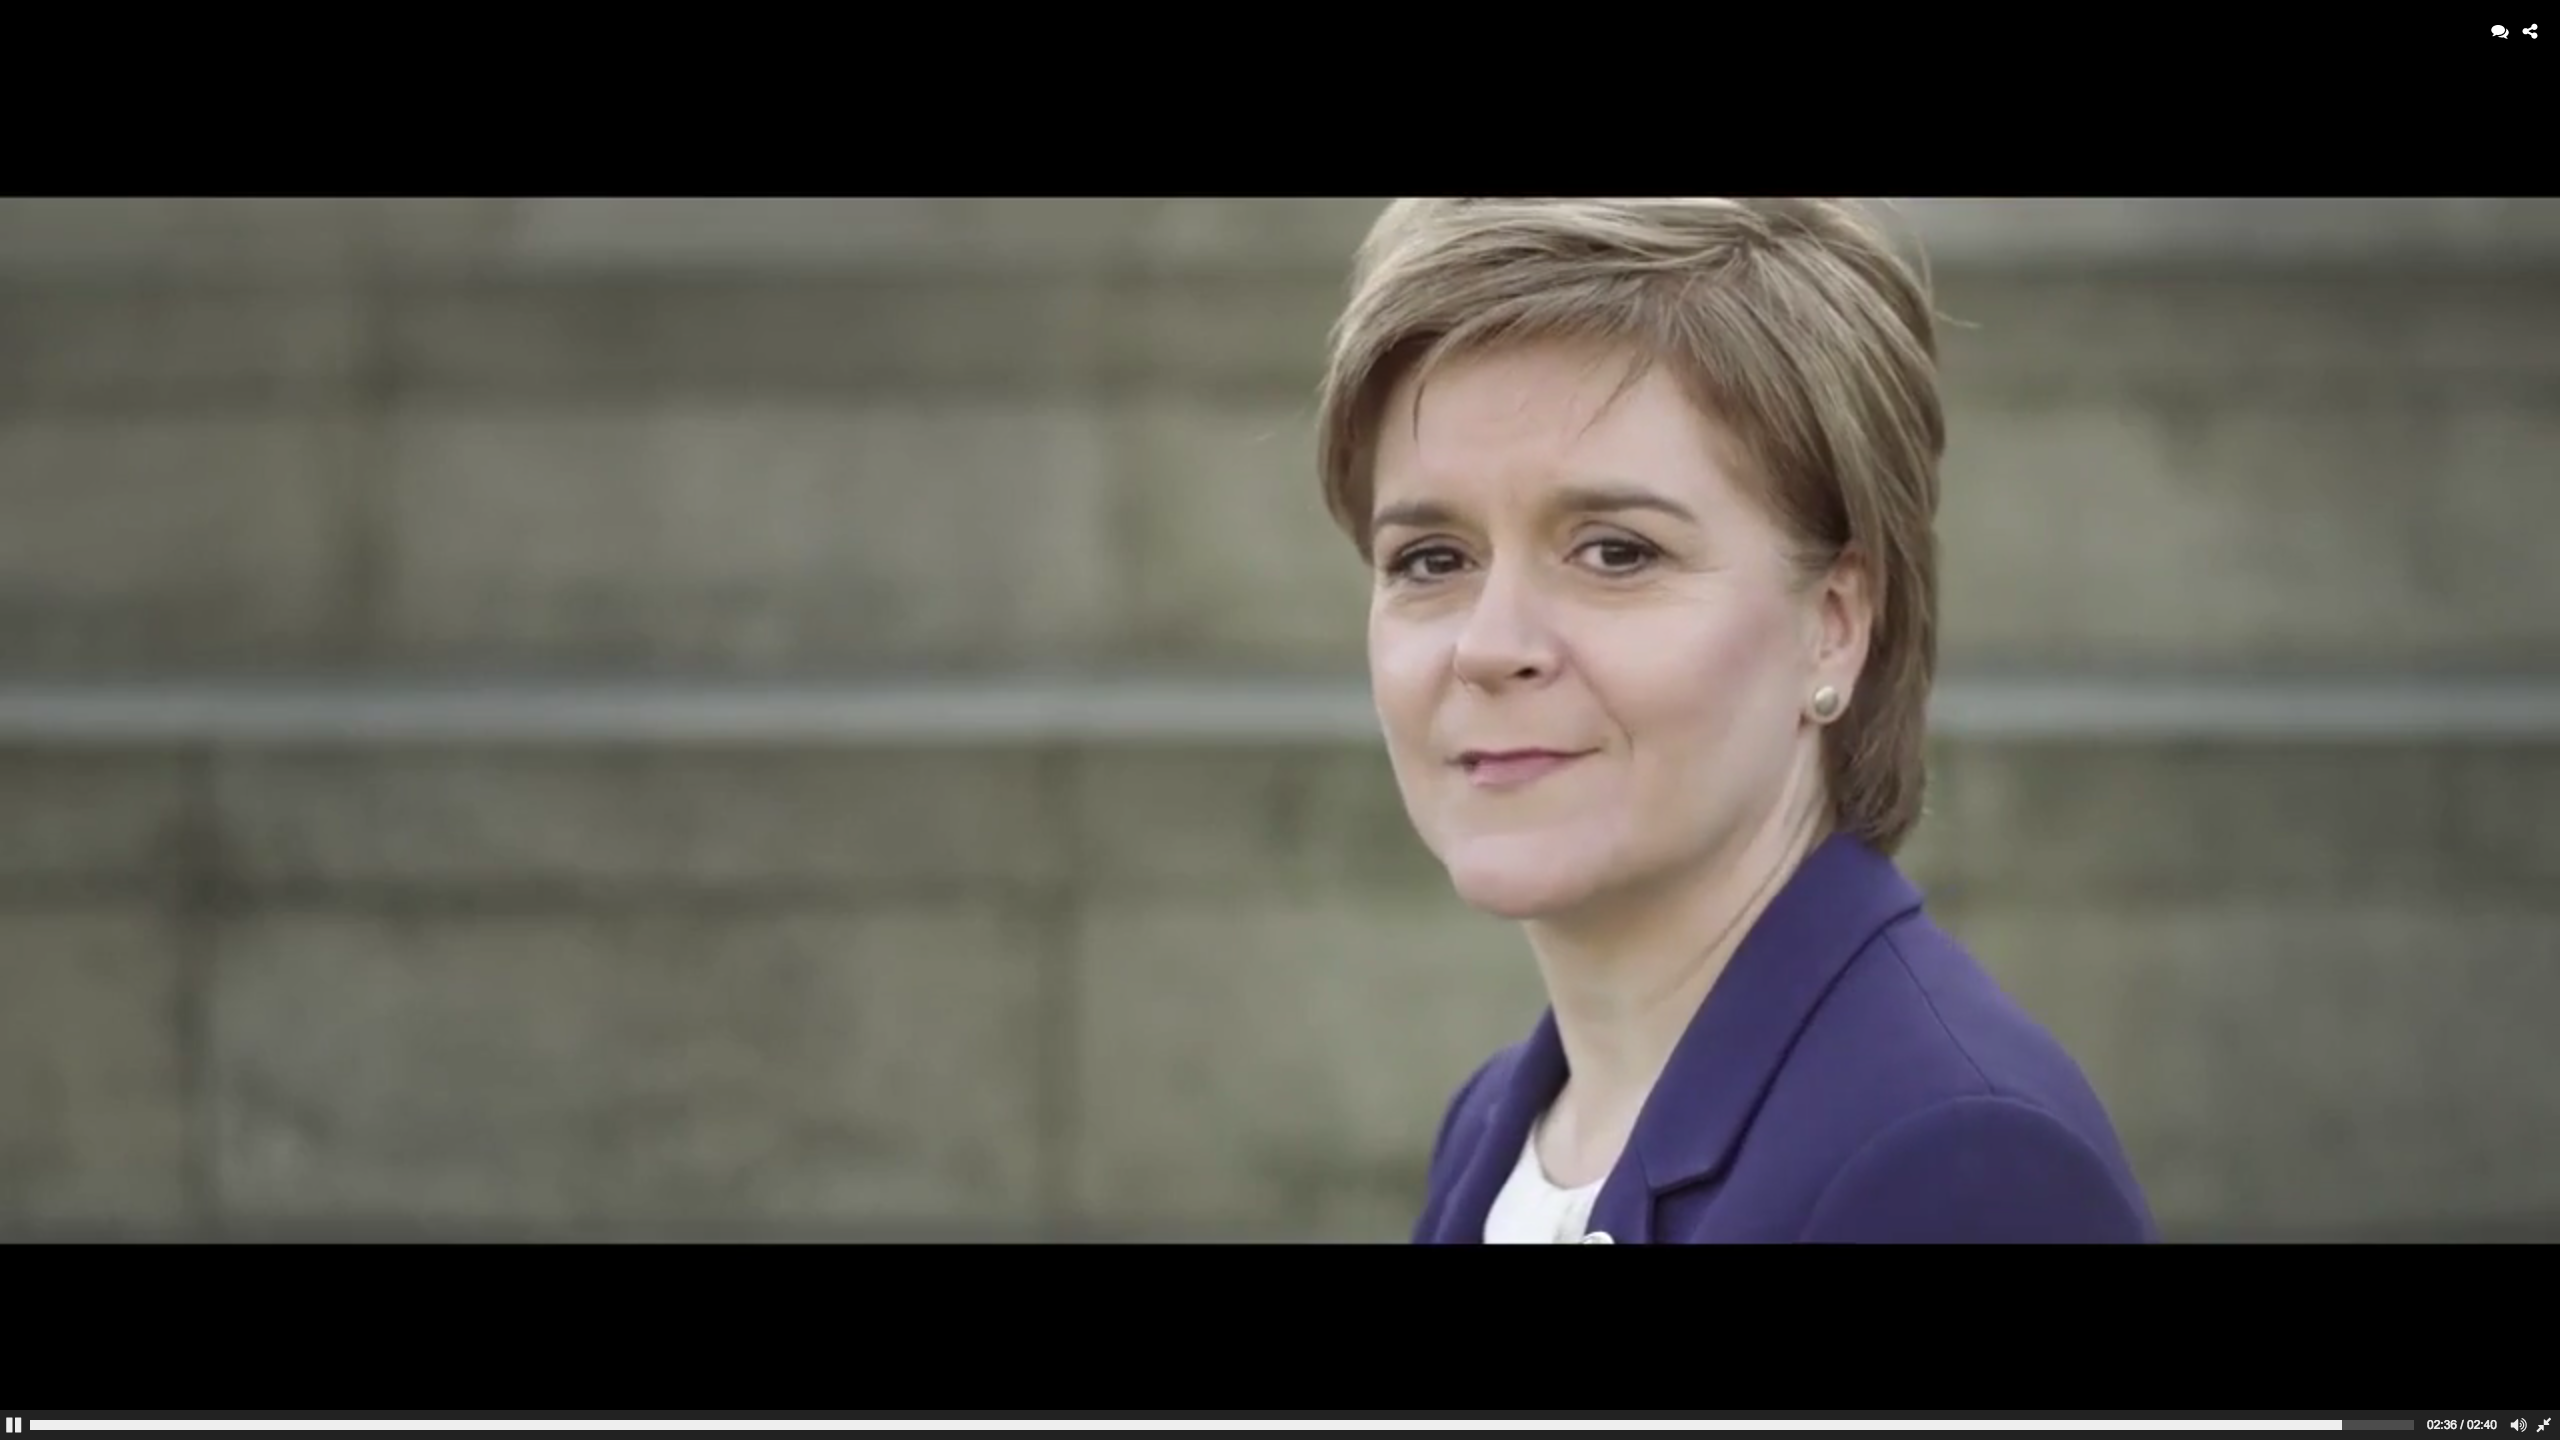 Nicola Strurgeon features in the party political video